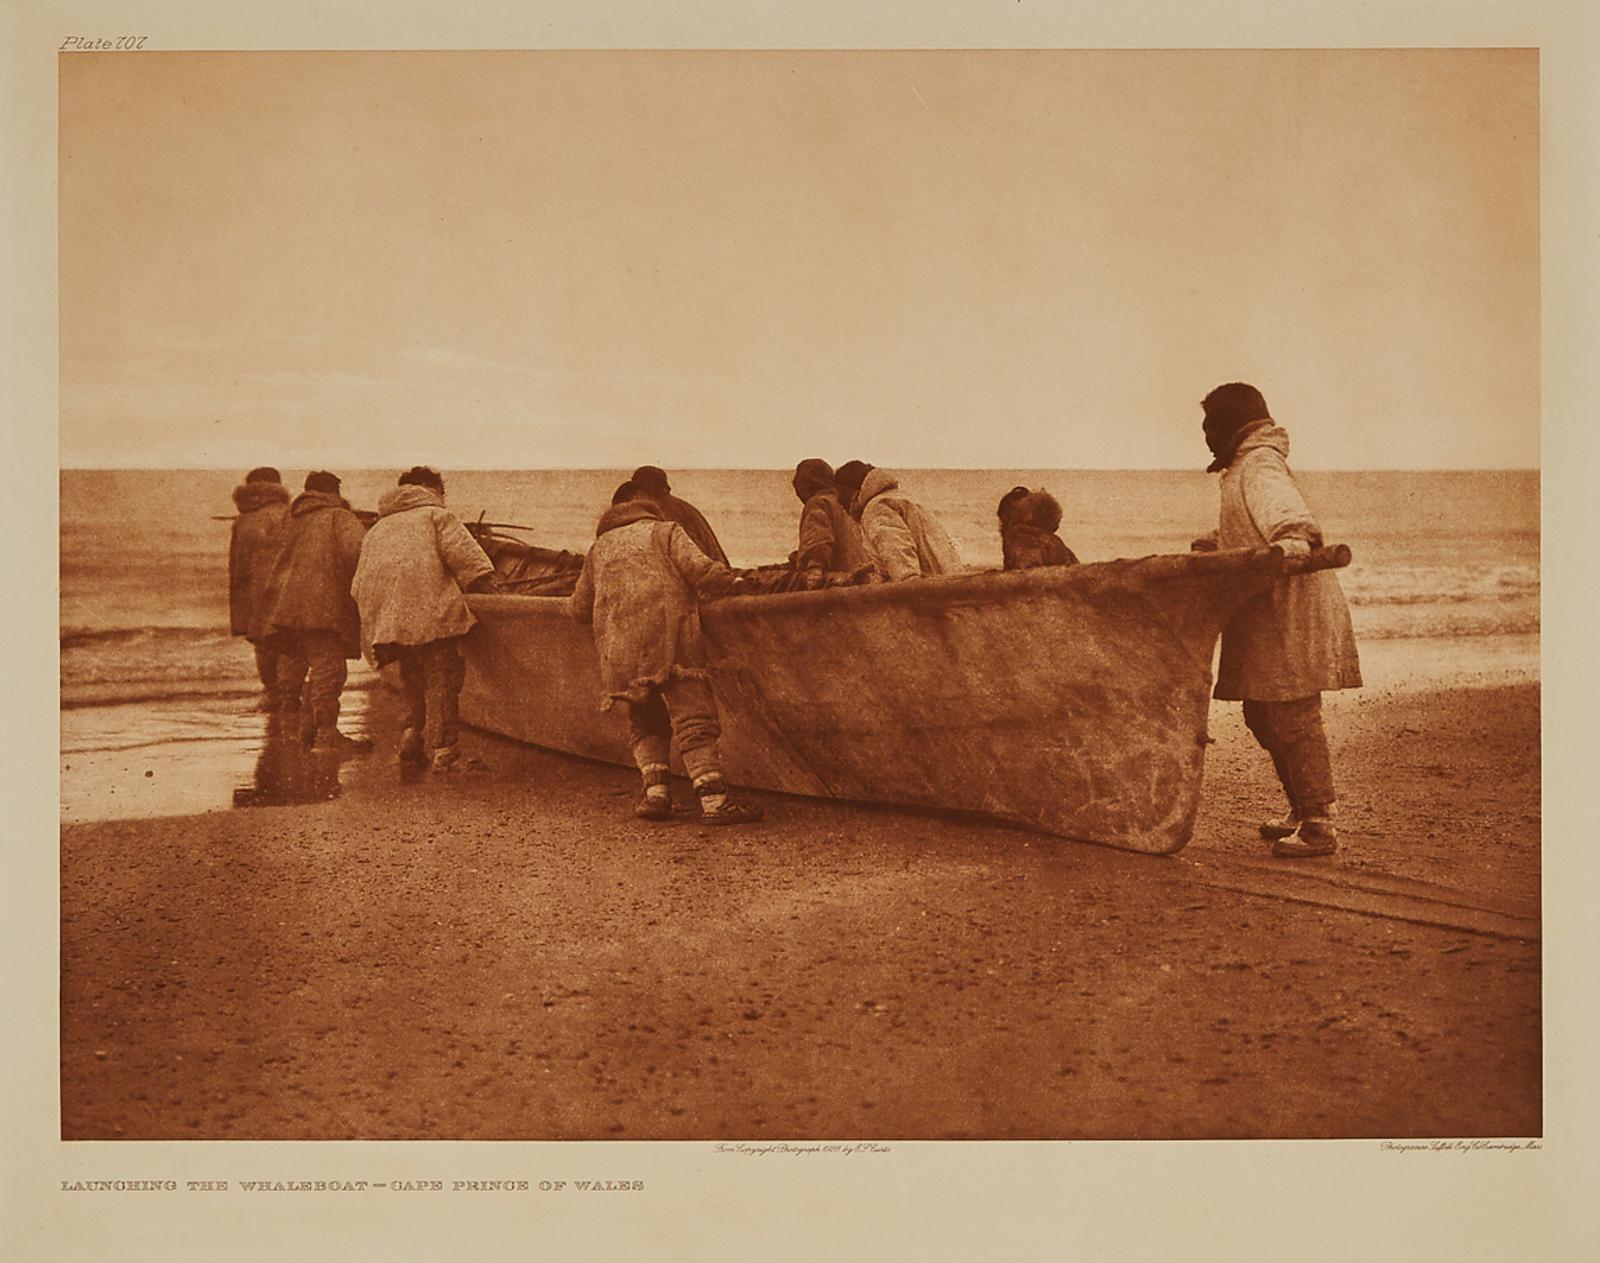 Edward Sherrif Curtis (1868-1952) - Launching The Whaleboat - Cape Prince Of Wales (From The North American Indian, Volume Xx, The Large Plates, Pl. 707), 1928